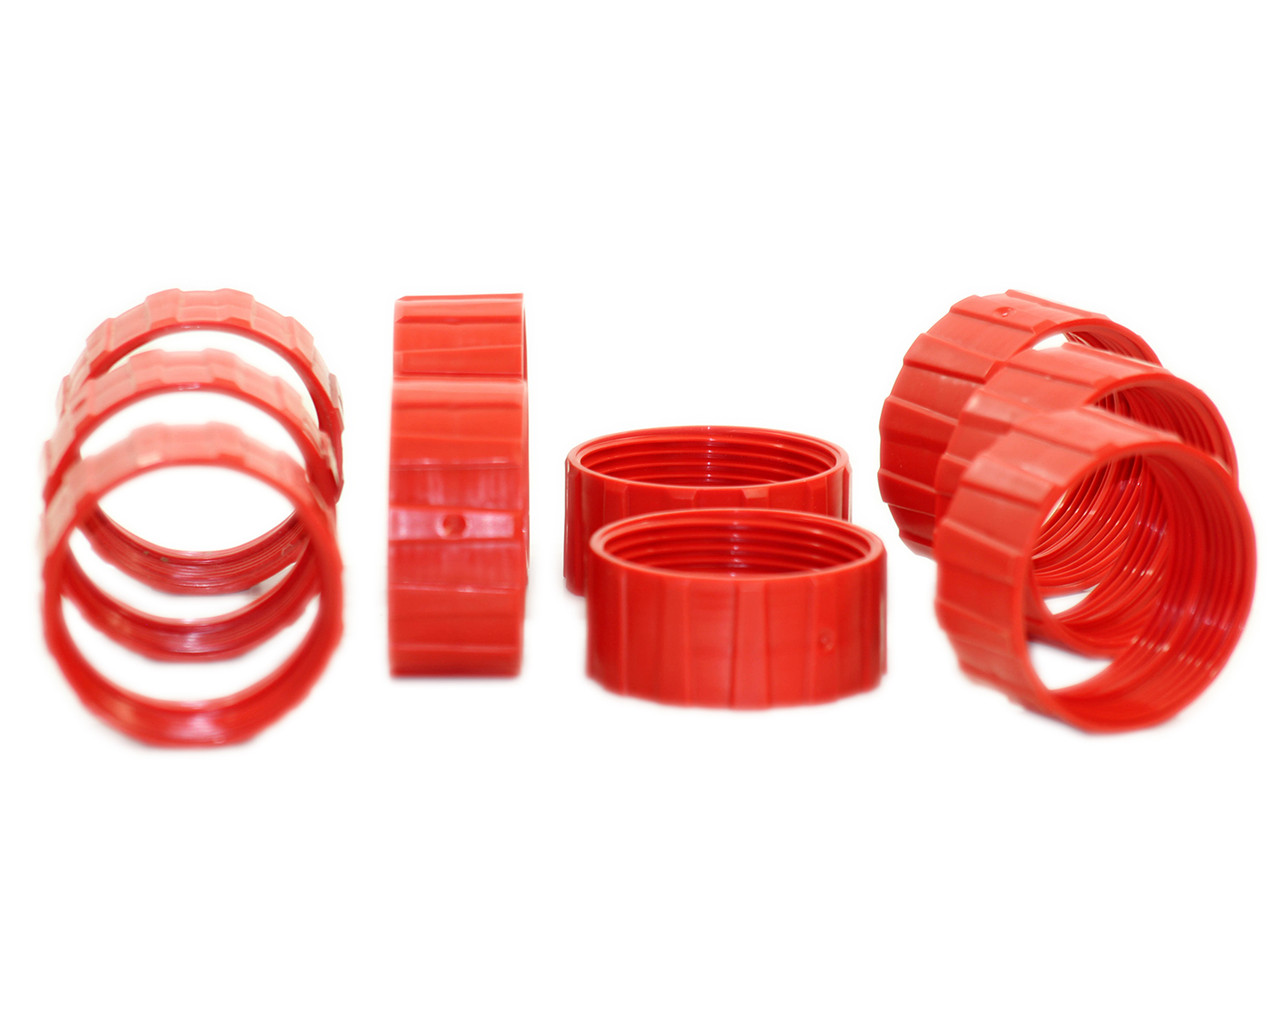 Hilti 2173396 Coupling Material: CPVC Size: 2 Inch Height Extension, CP 680-P/M